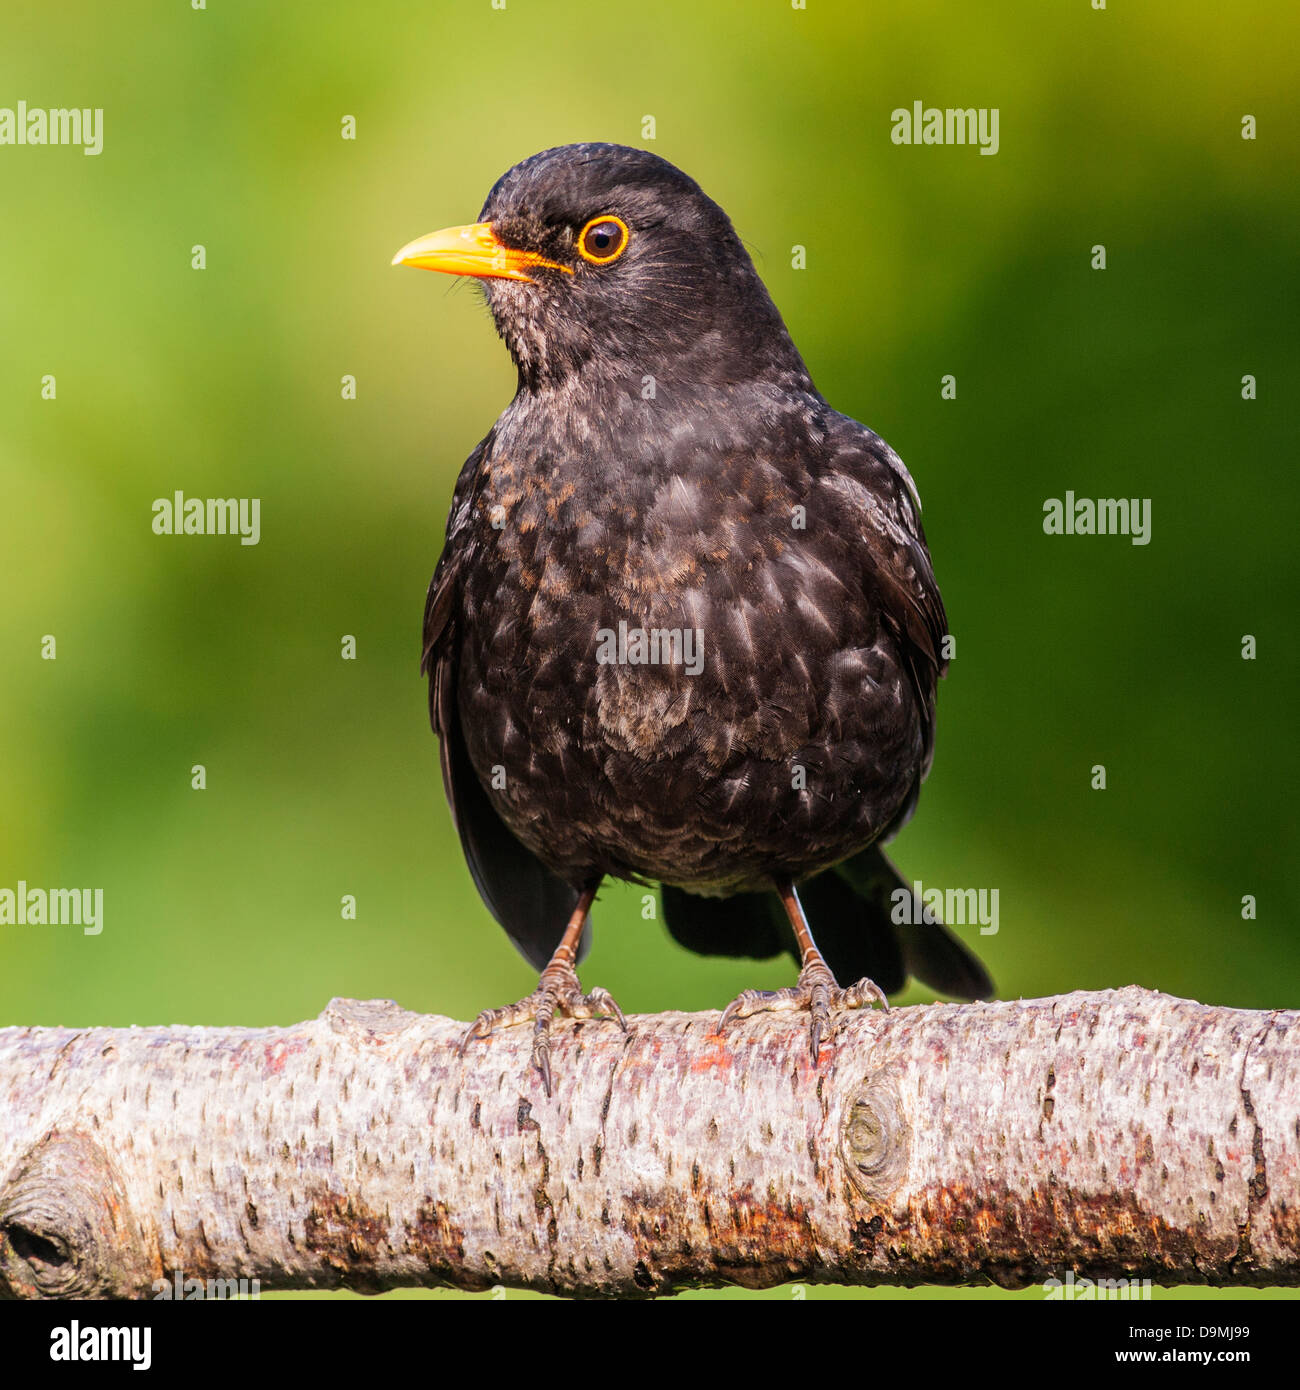 A Young Male Blackbird Sitting on Branch (Turdus merula) in the Uk Stock Photo